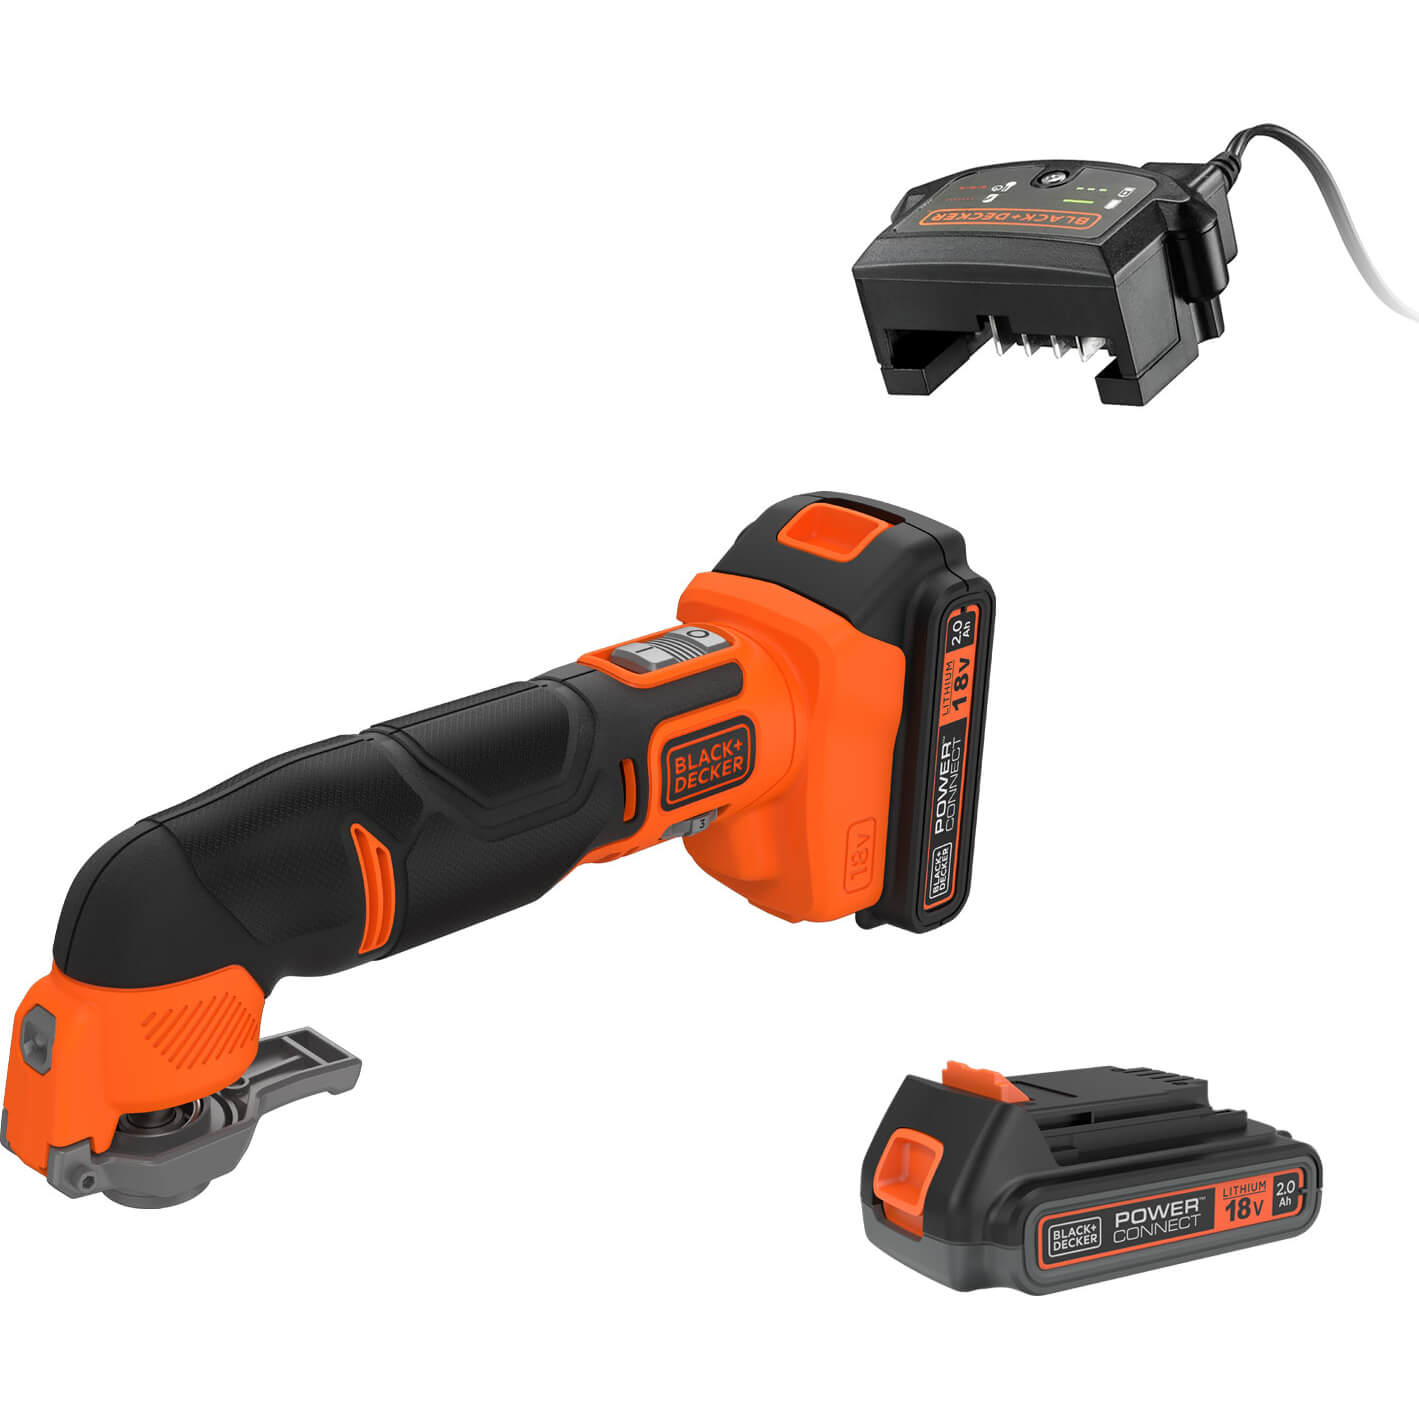 Image of Black and Decker BDCOS18 18v Cordless Oscillating Multi Tool 2 x 2ah Li-ion Charger Case & Accessories